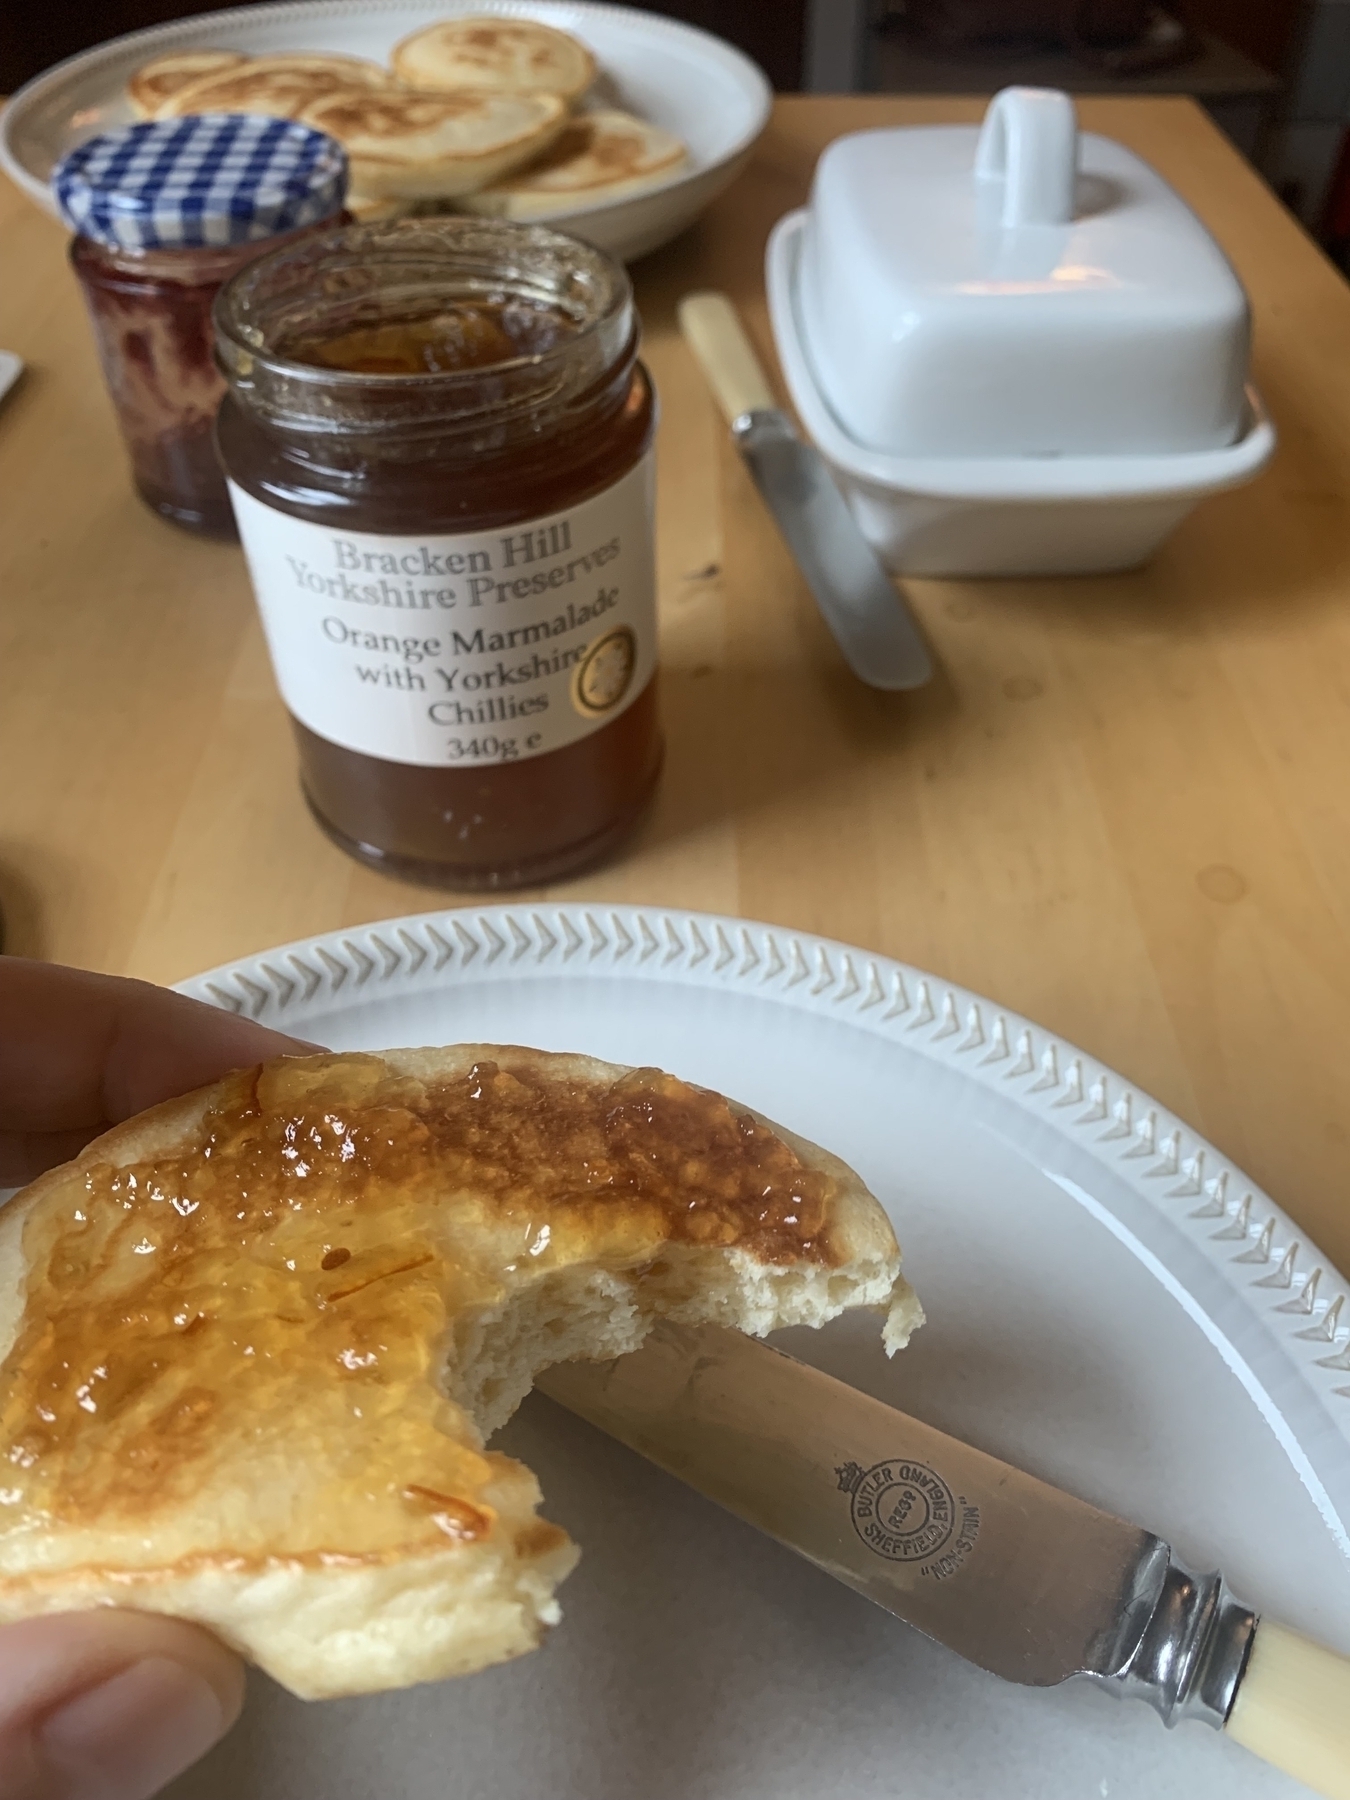 Drop scone with a bite take from it covered in a thin layer of preserve. Open jar of orange marmalade with Yorkshire chillies in the background.